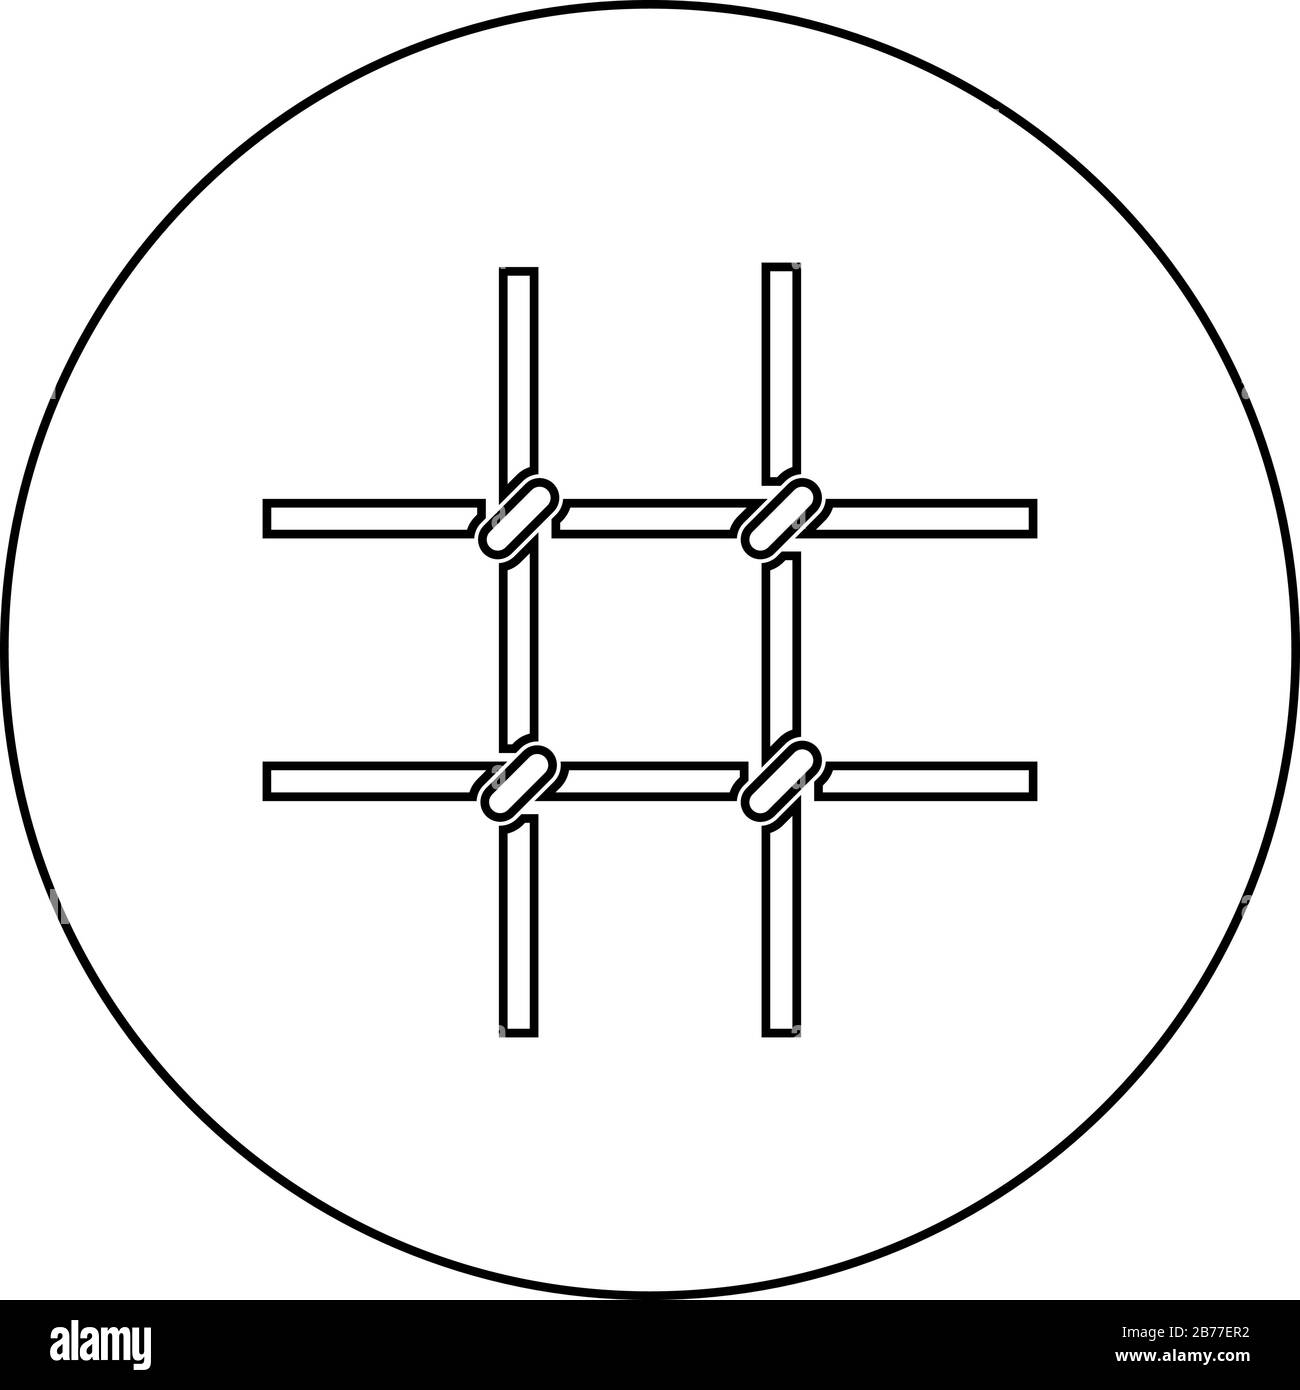 Prison bars Metal grid icon in circle round outline black color vector illustration flat style simple image Stock Vector